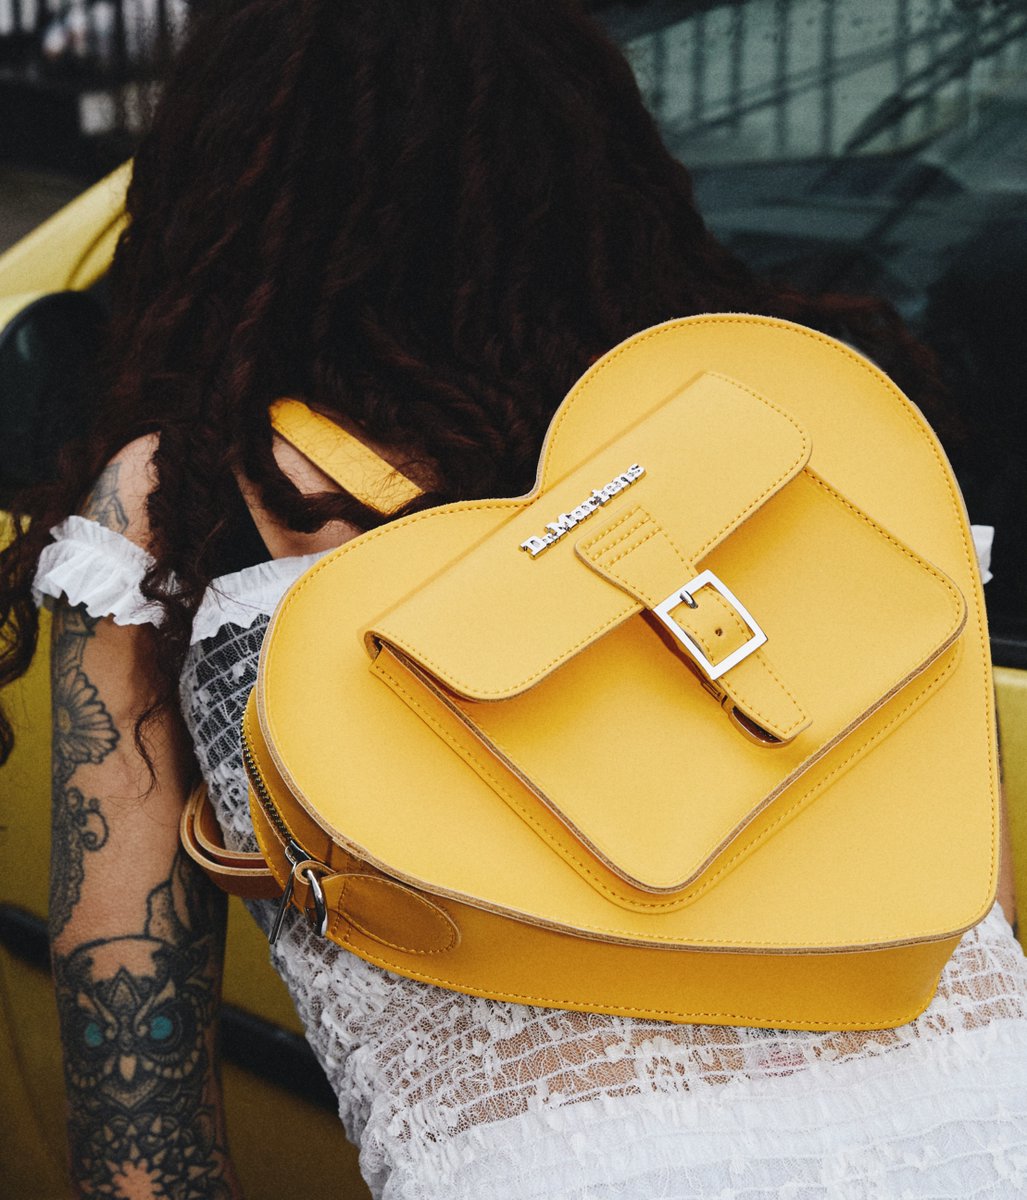 The iconic Heart Bag, in iconic DM's Yellow. What colour would you like to see next?